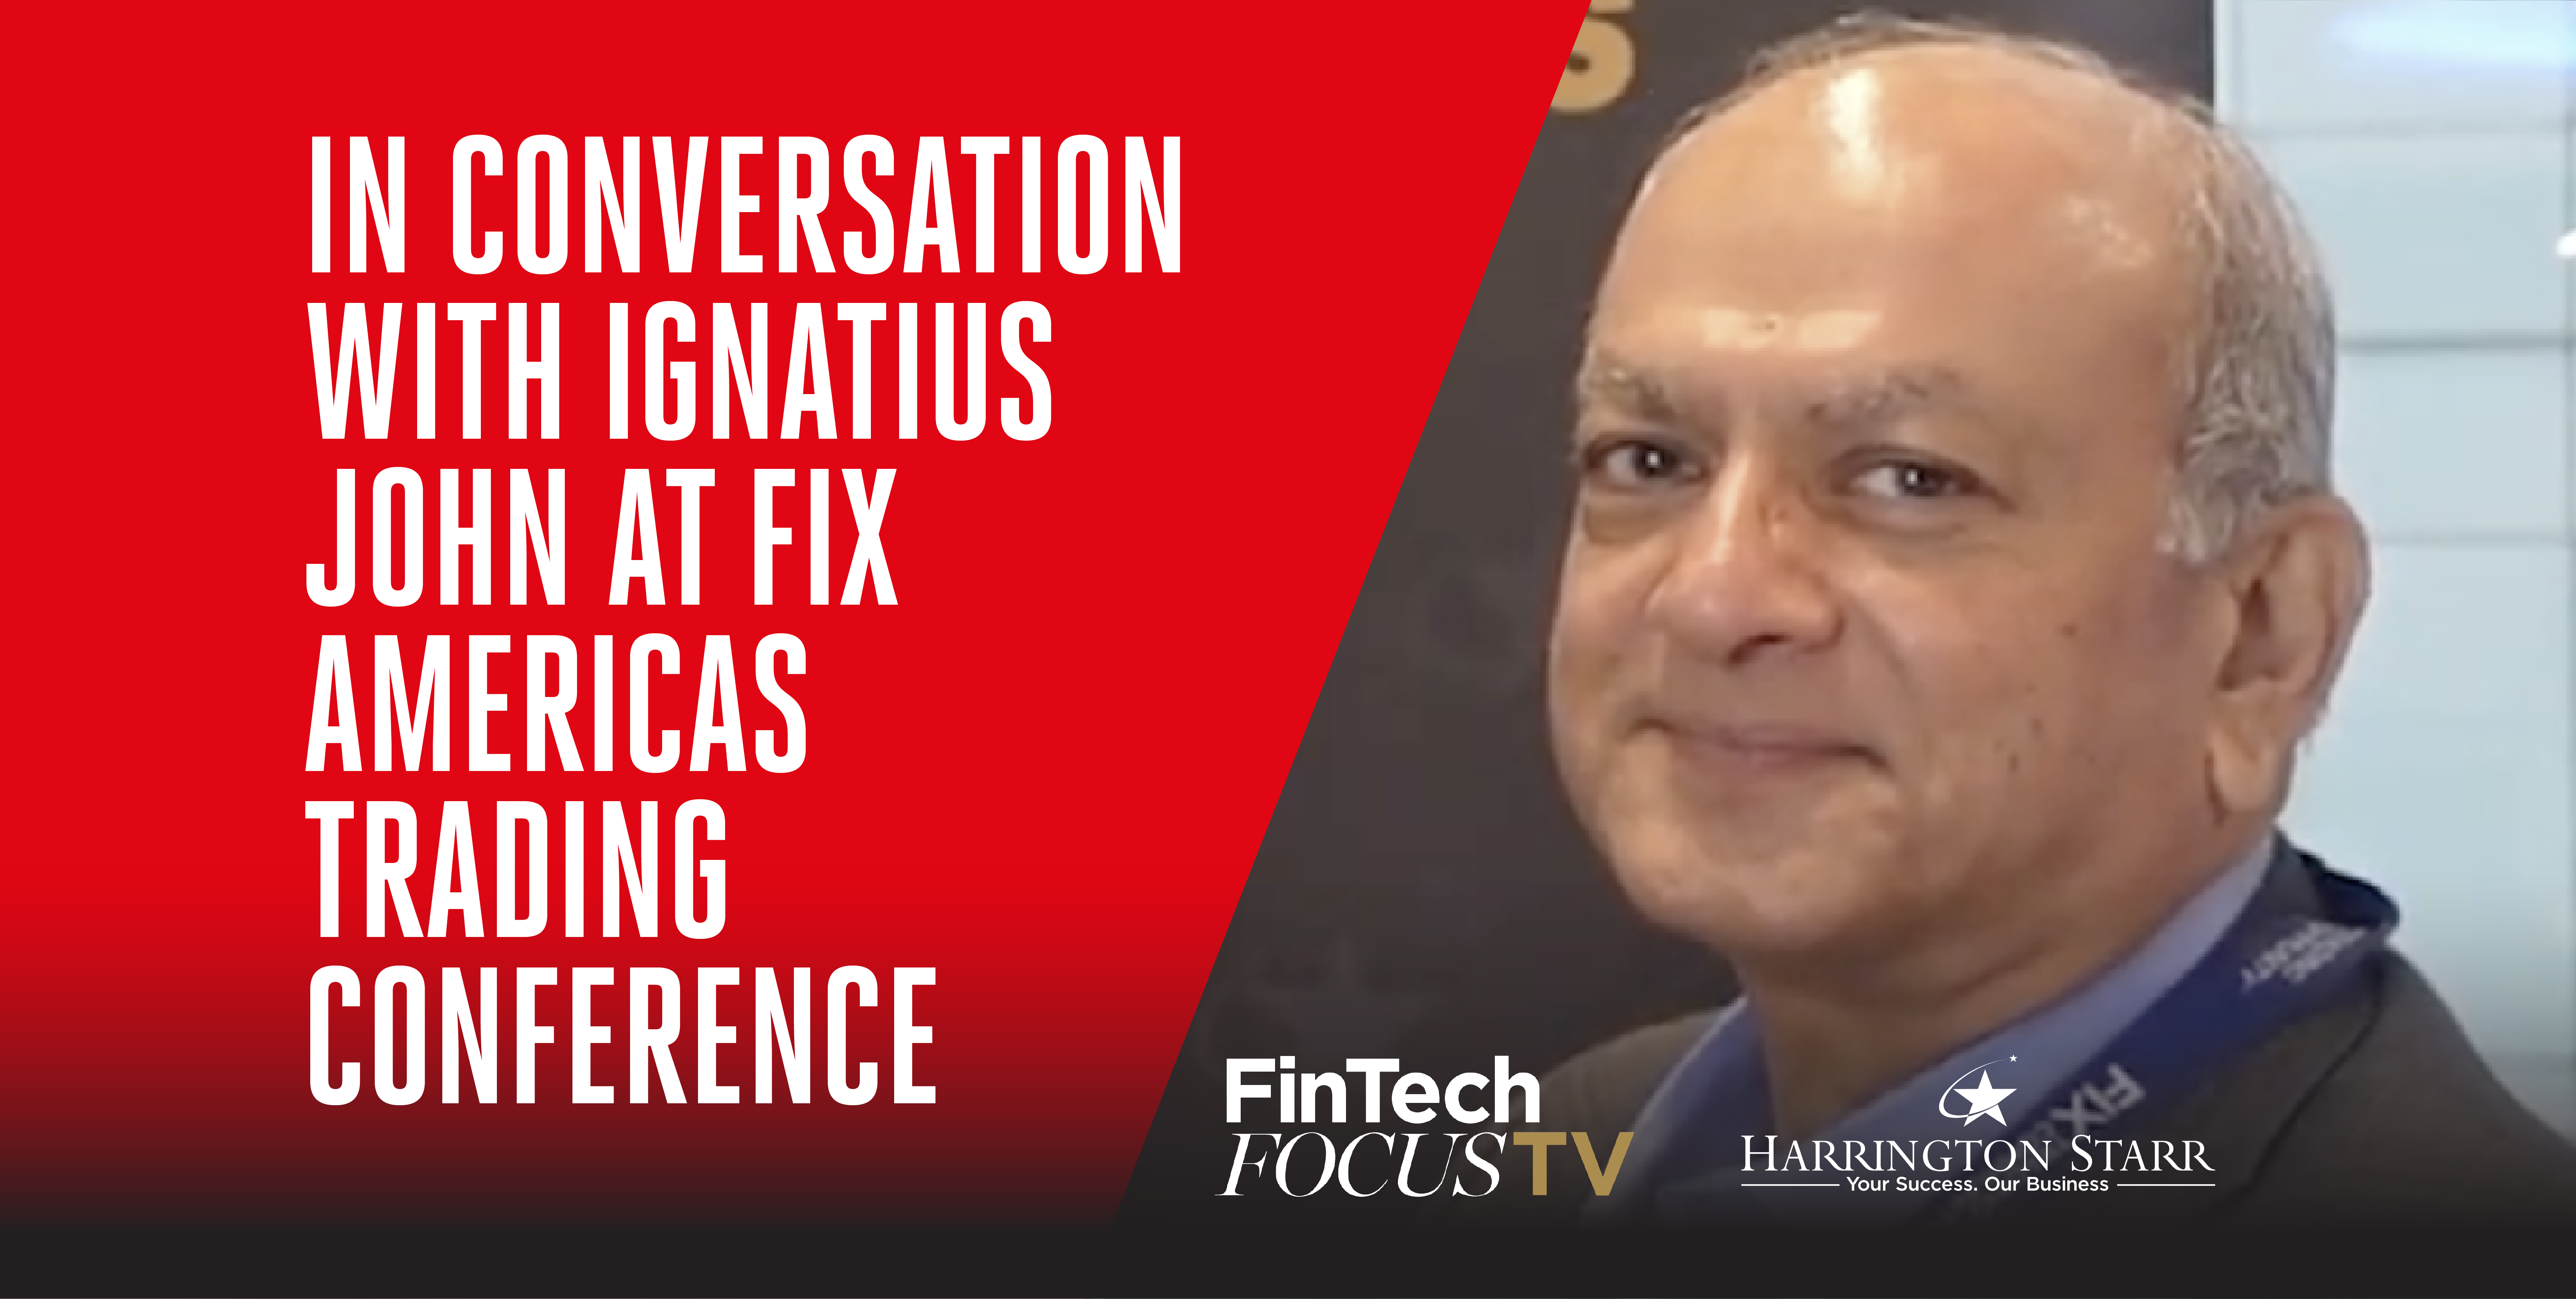 In Conversation with Ignatius John at FIX Americas Trading Conference